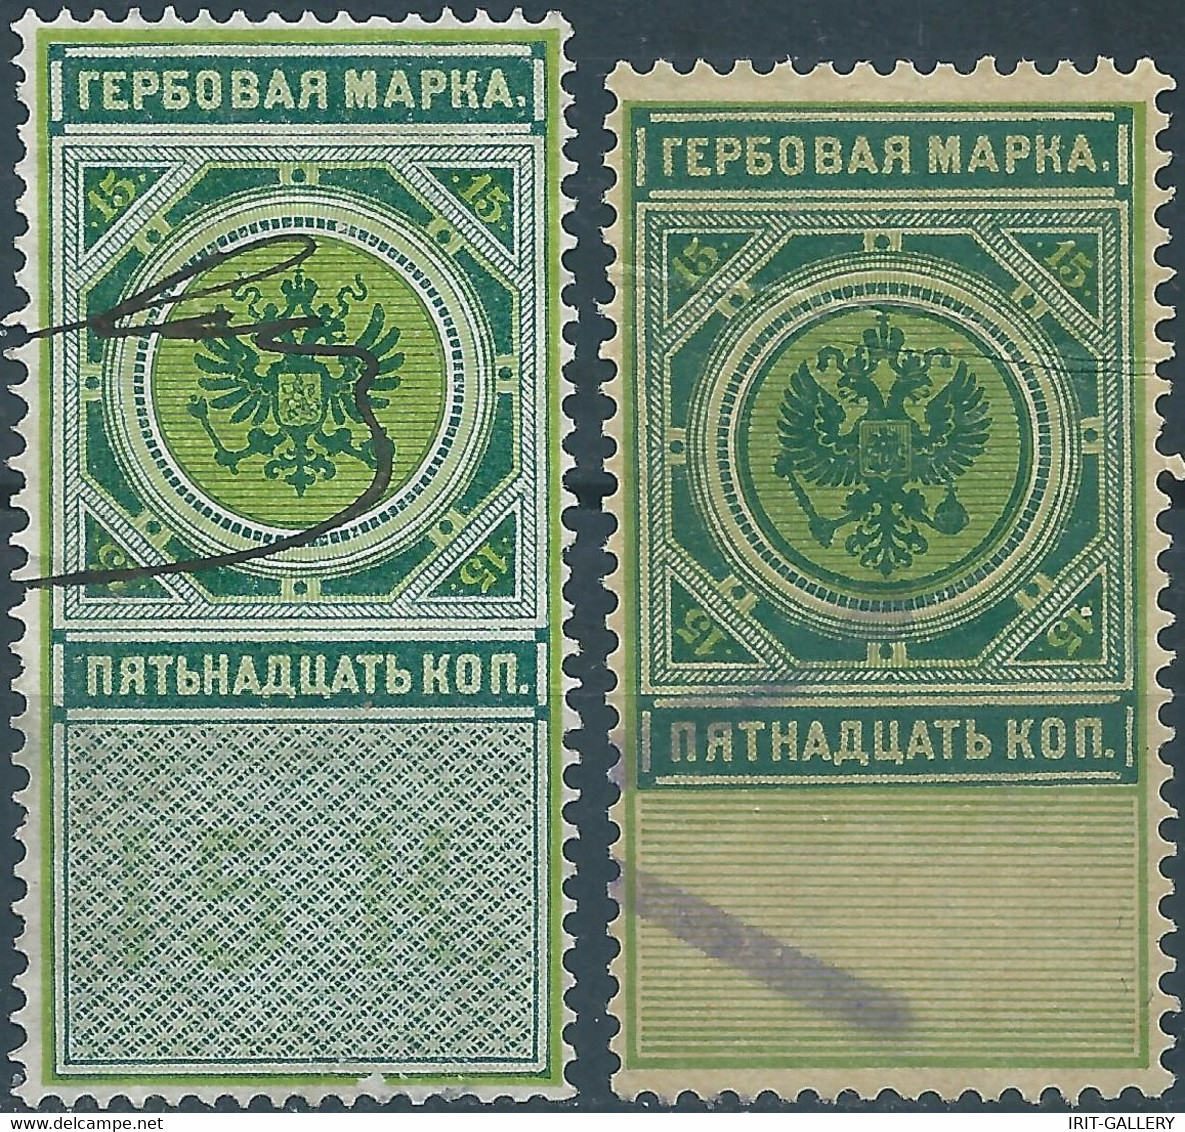 Russia - Russie - Russland,1886-1890 Revenue Stamps Fiscal Tax 15kop,1st And 2nd Issue, Different In Size And Color,used - Fiscale Zegels